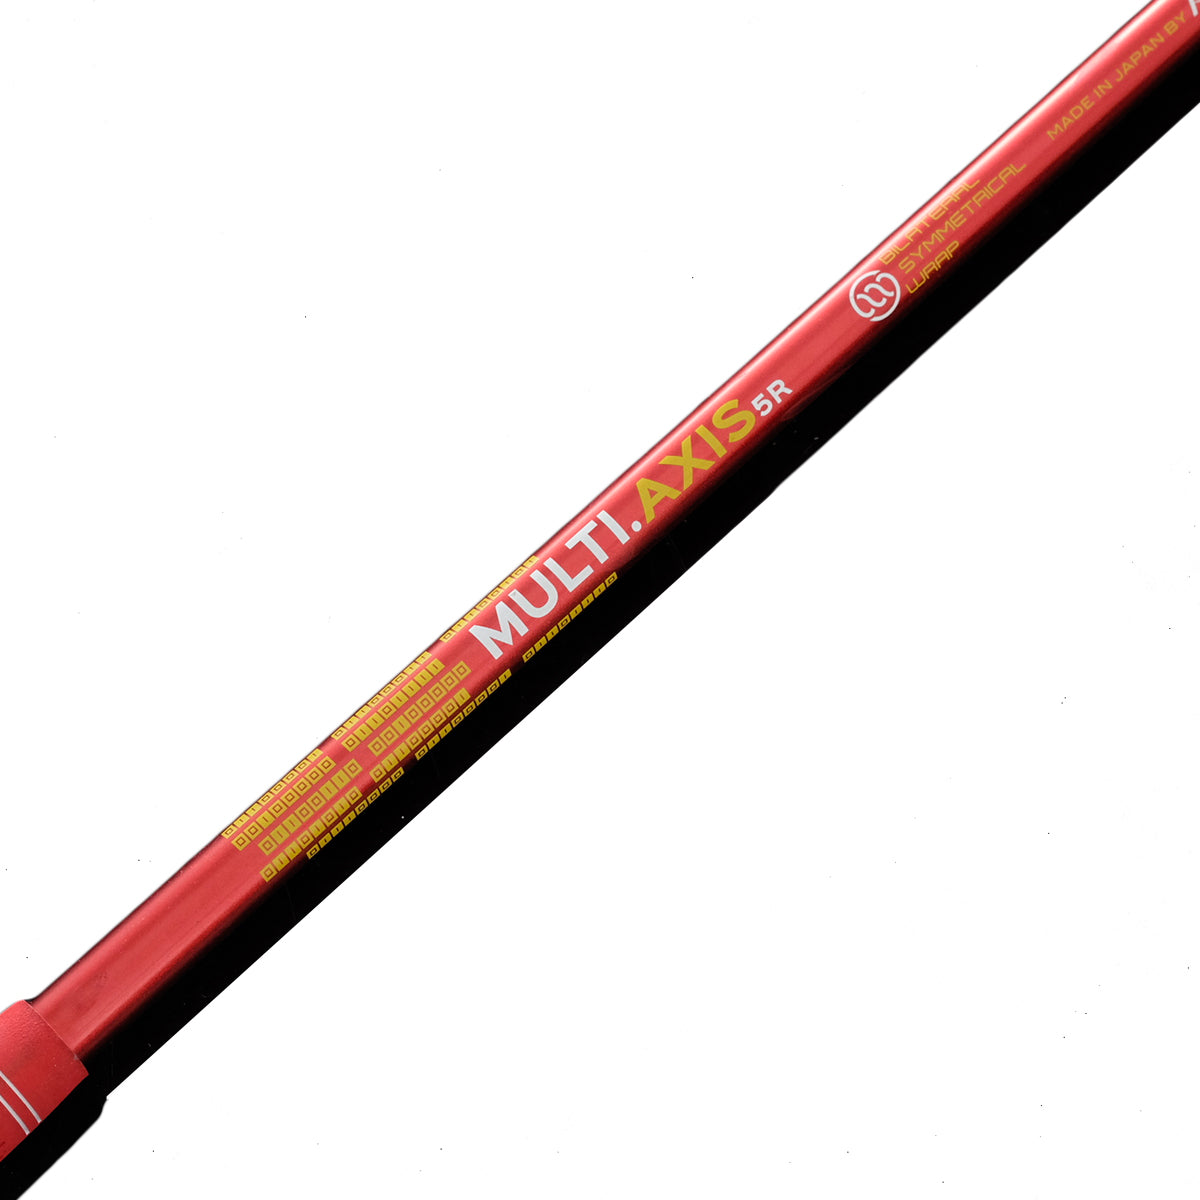 Grindworks A.Japa Multi Axis High-Modulus Carbon Weave Driver/Wood Shaft